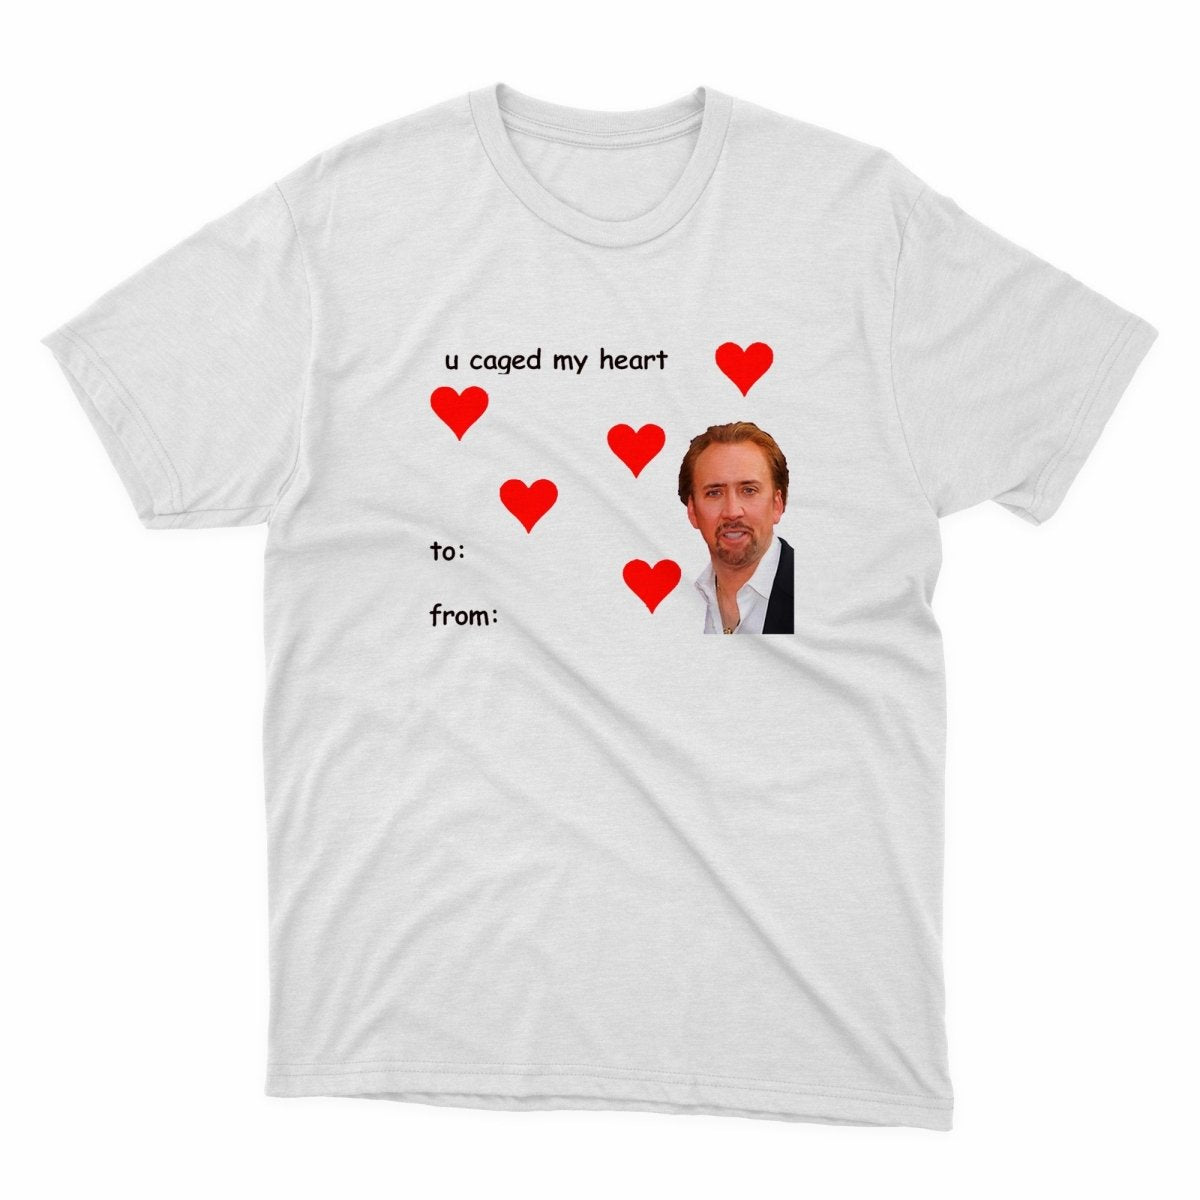 Nicolas Cage Caged My Heart Shirt - stickerbullNicolas Cage Caged My Heart ShirtShirtsPrintifystickerbull18835426492604395266WhiteSa t - shirt with a picture of a man with hearts on it